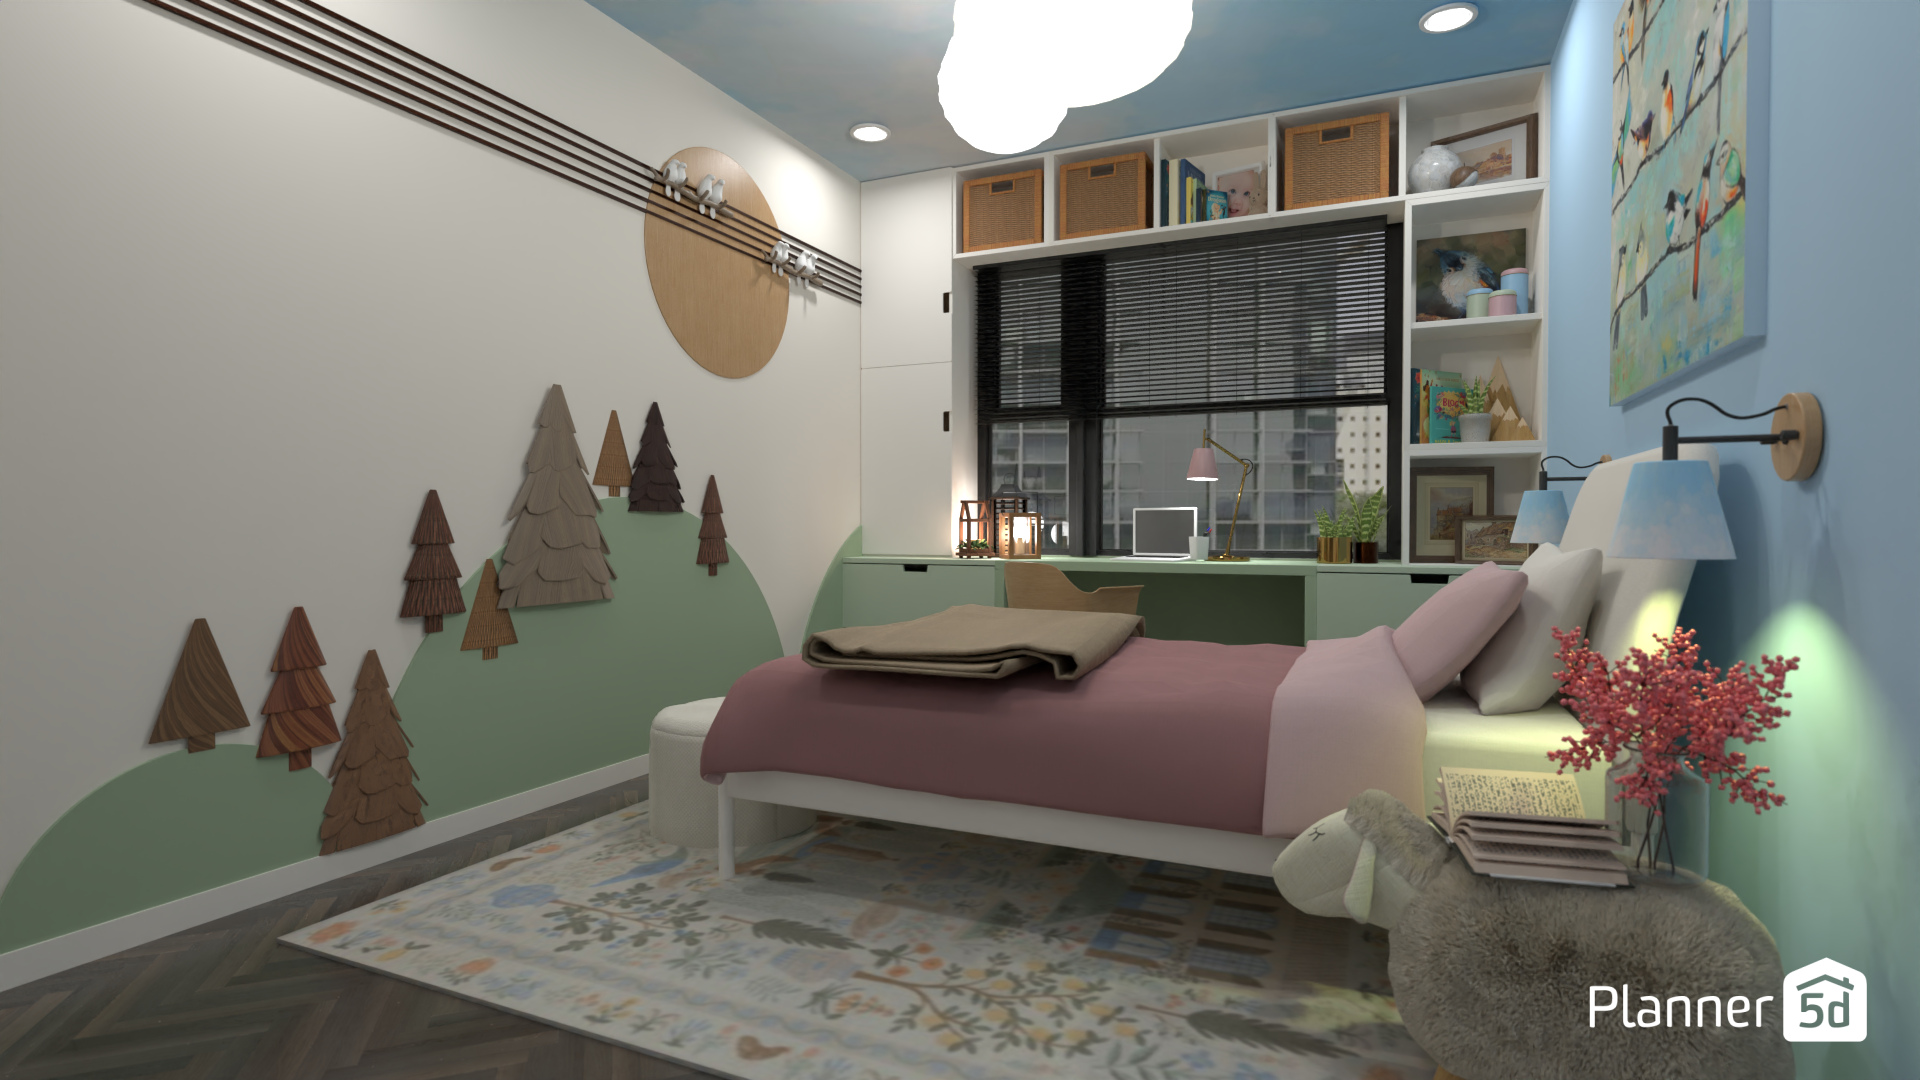 Kid's room in BM paint colors 16595587 by Darina Doncheva image